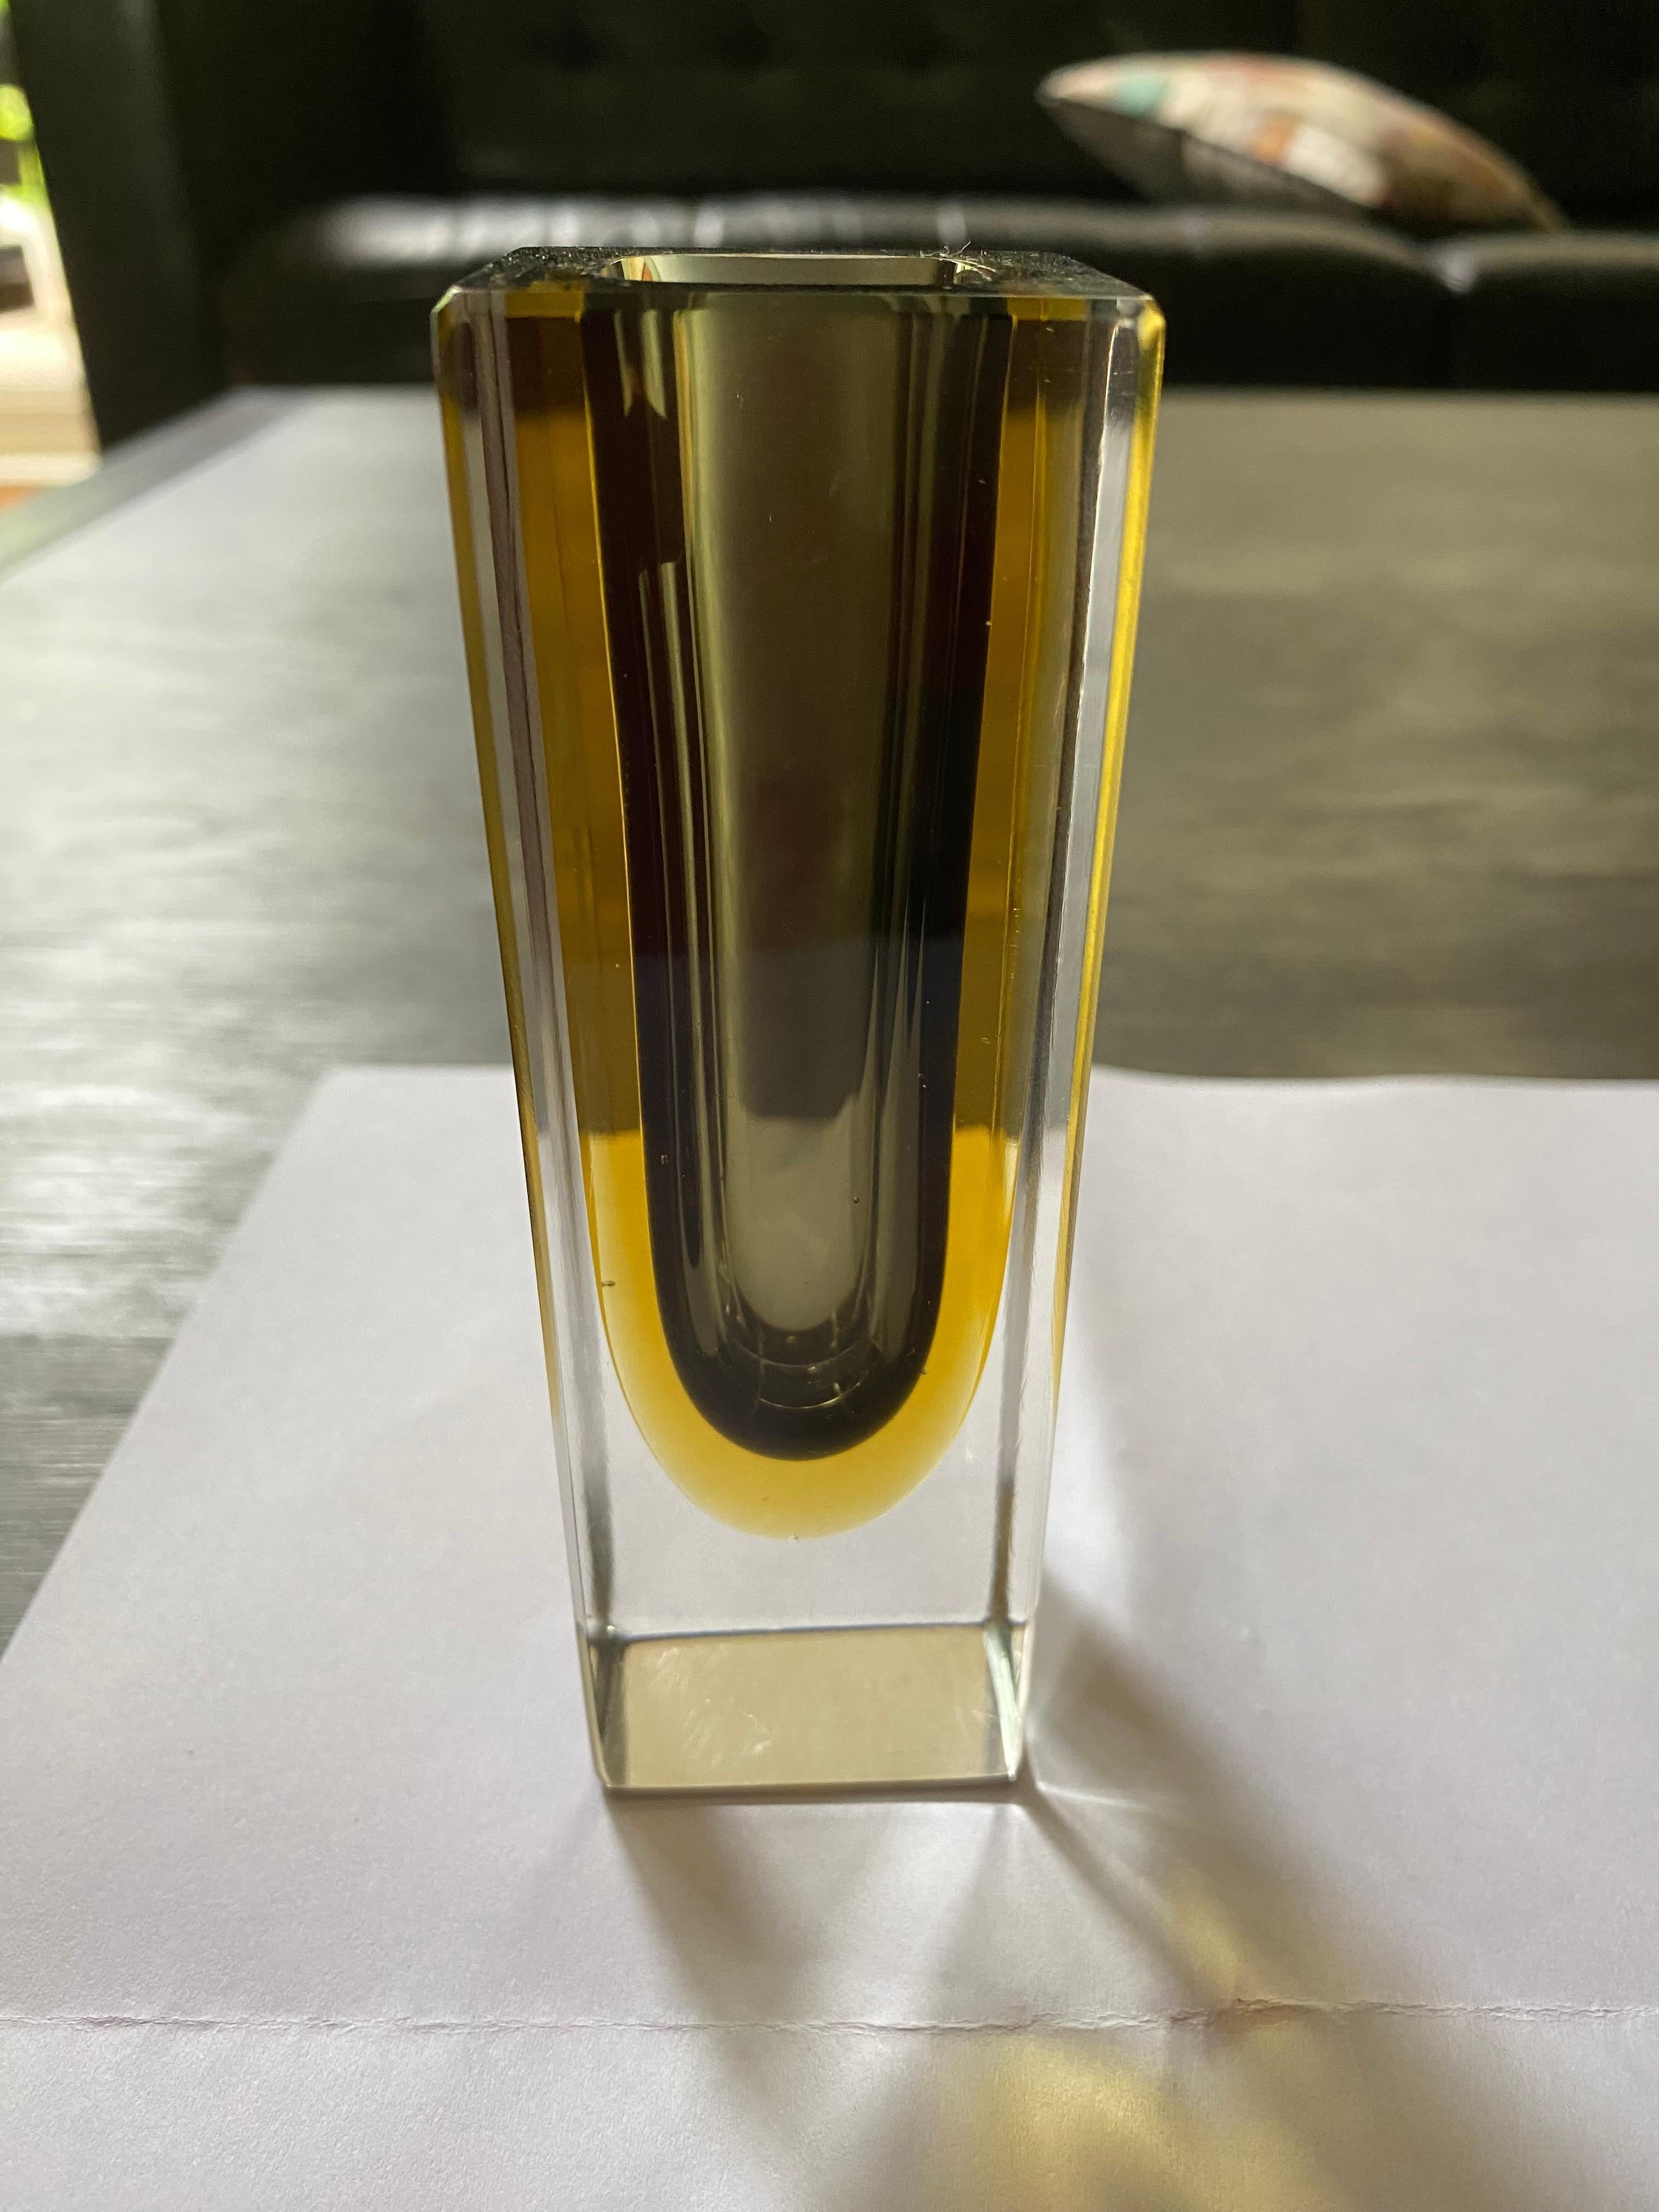 Beautiful olive green with yellow Mid-Century Modern Italian Murano glass vase. Made using the Sommerso (submerged) glass technique.